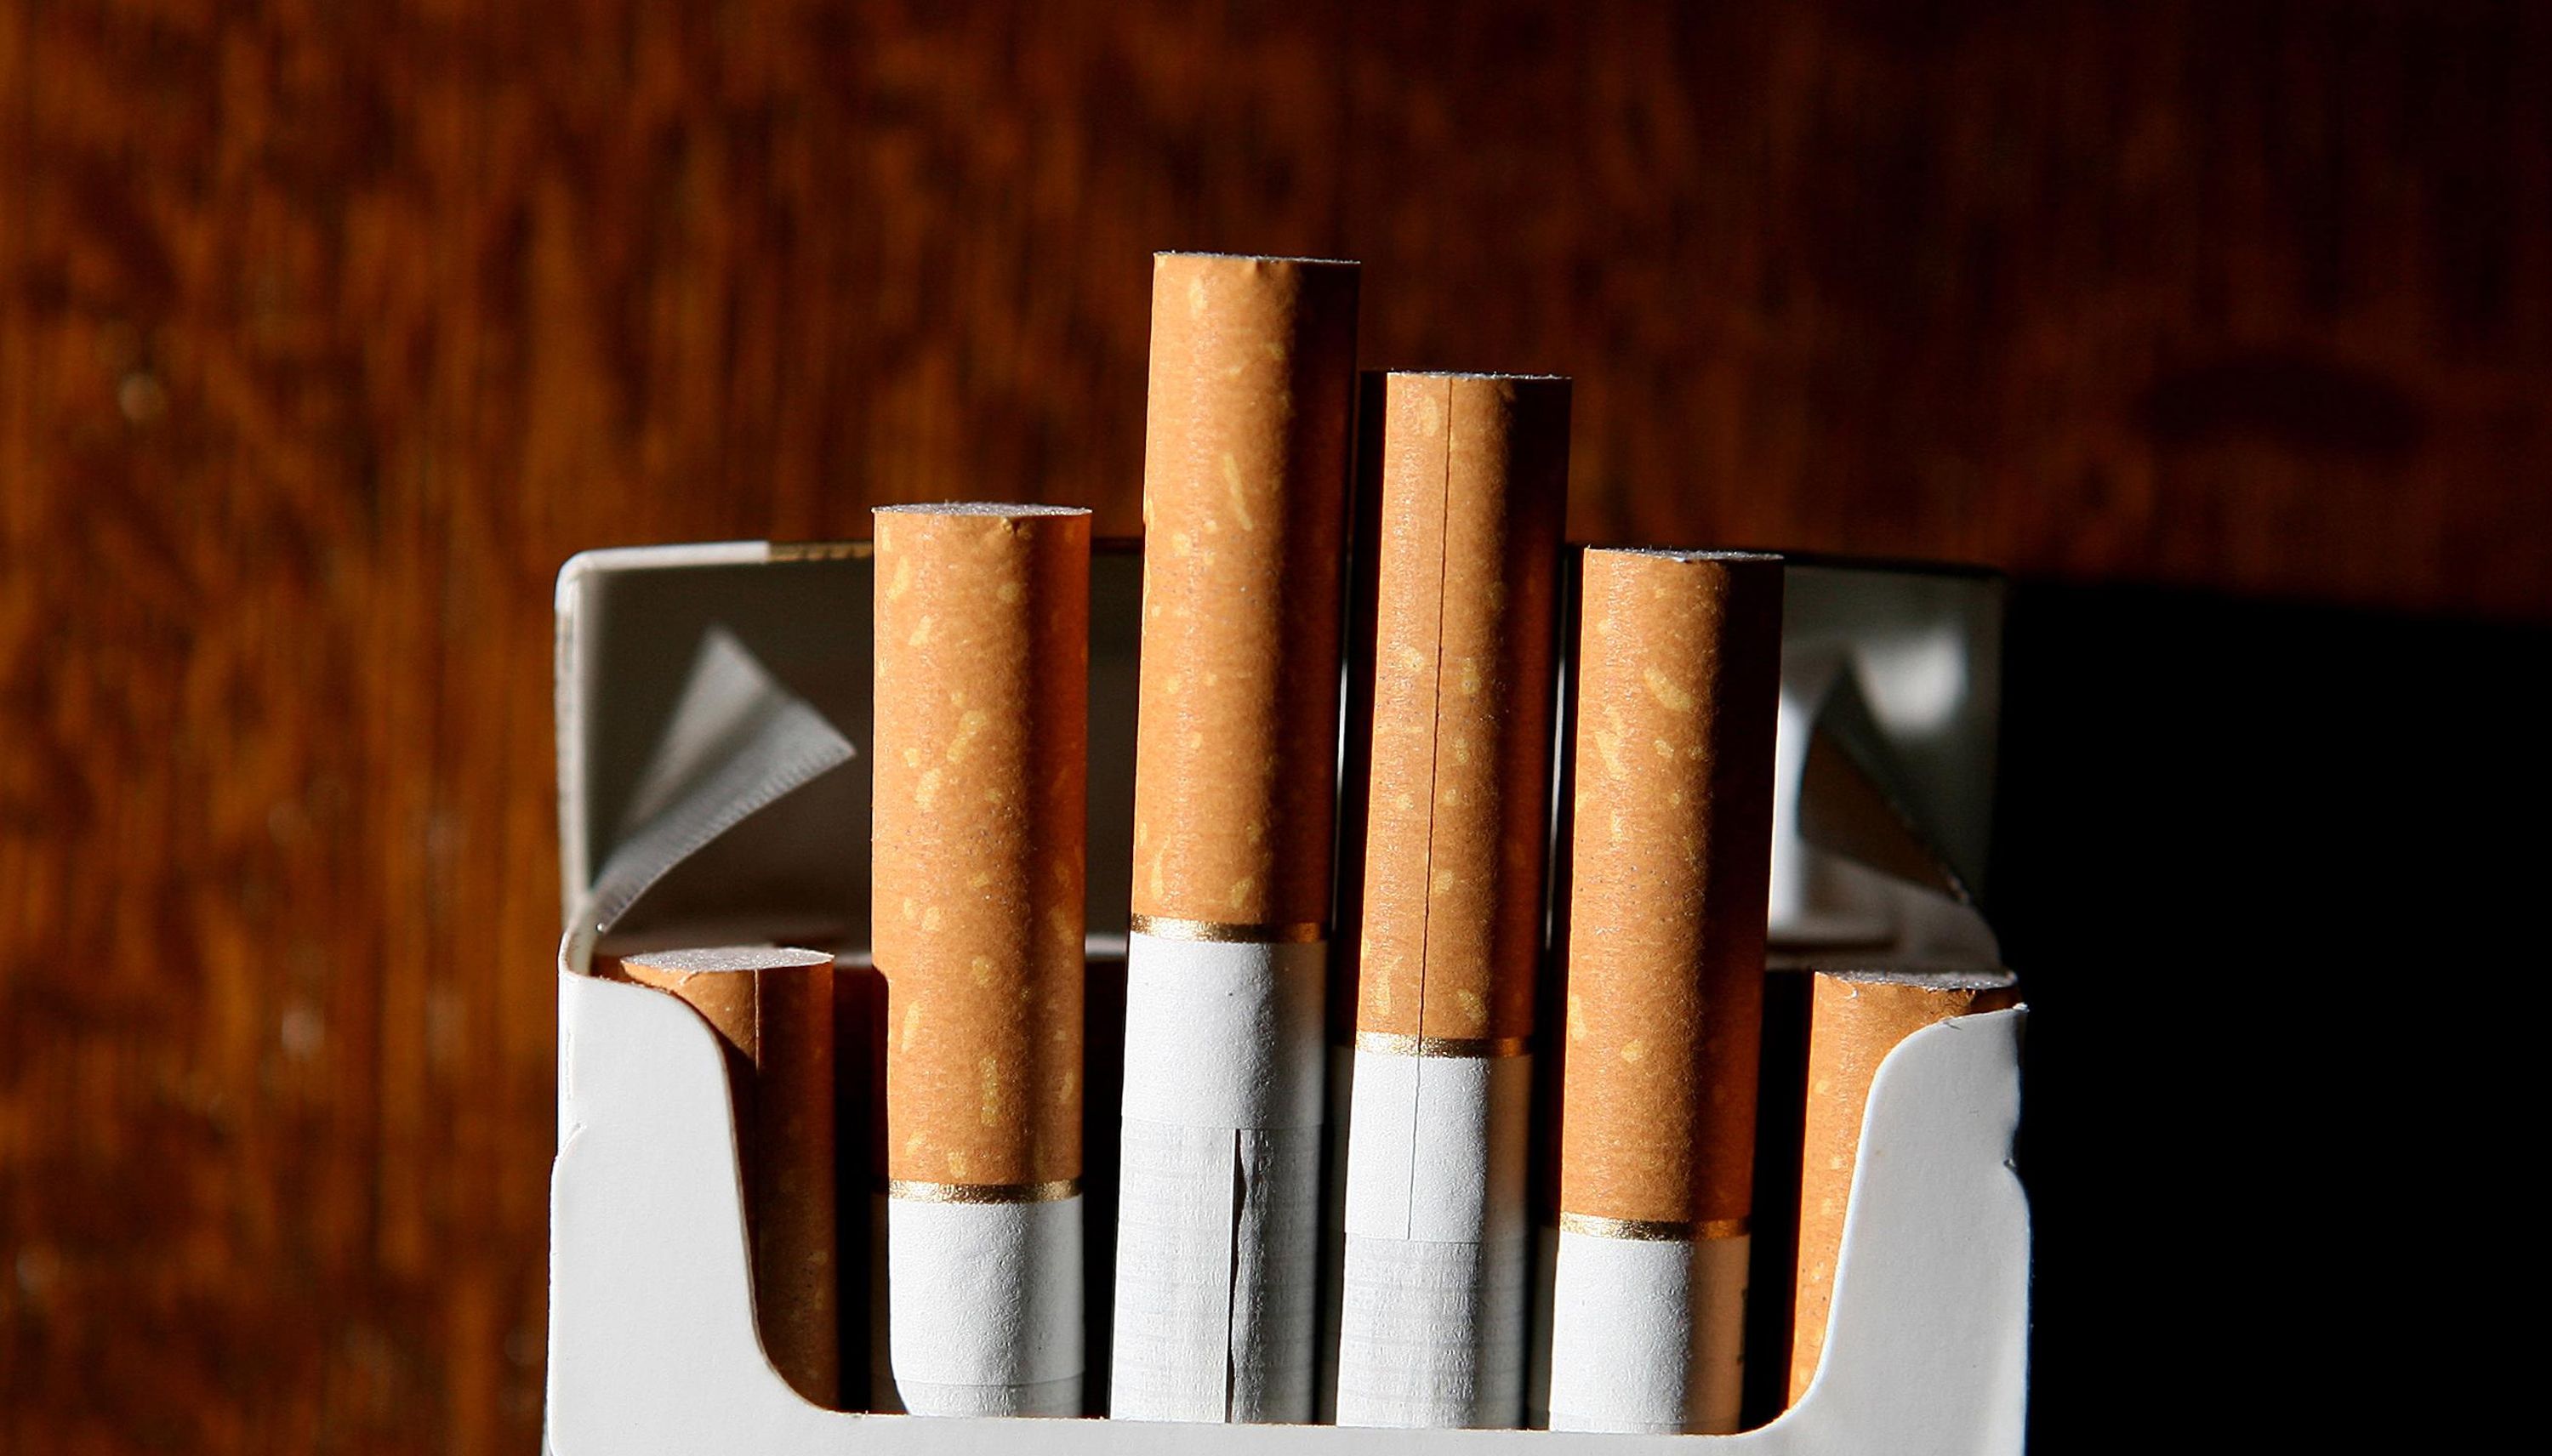 Denmark's Social Liberals said they would prefer to add 50 per cent to the cost of a packet of cigarettes.